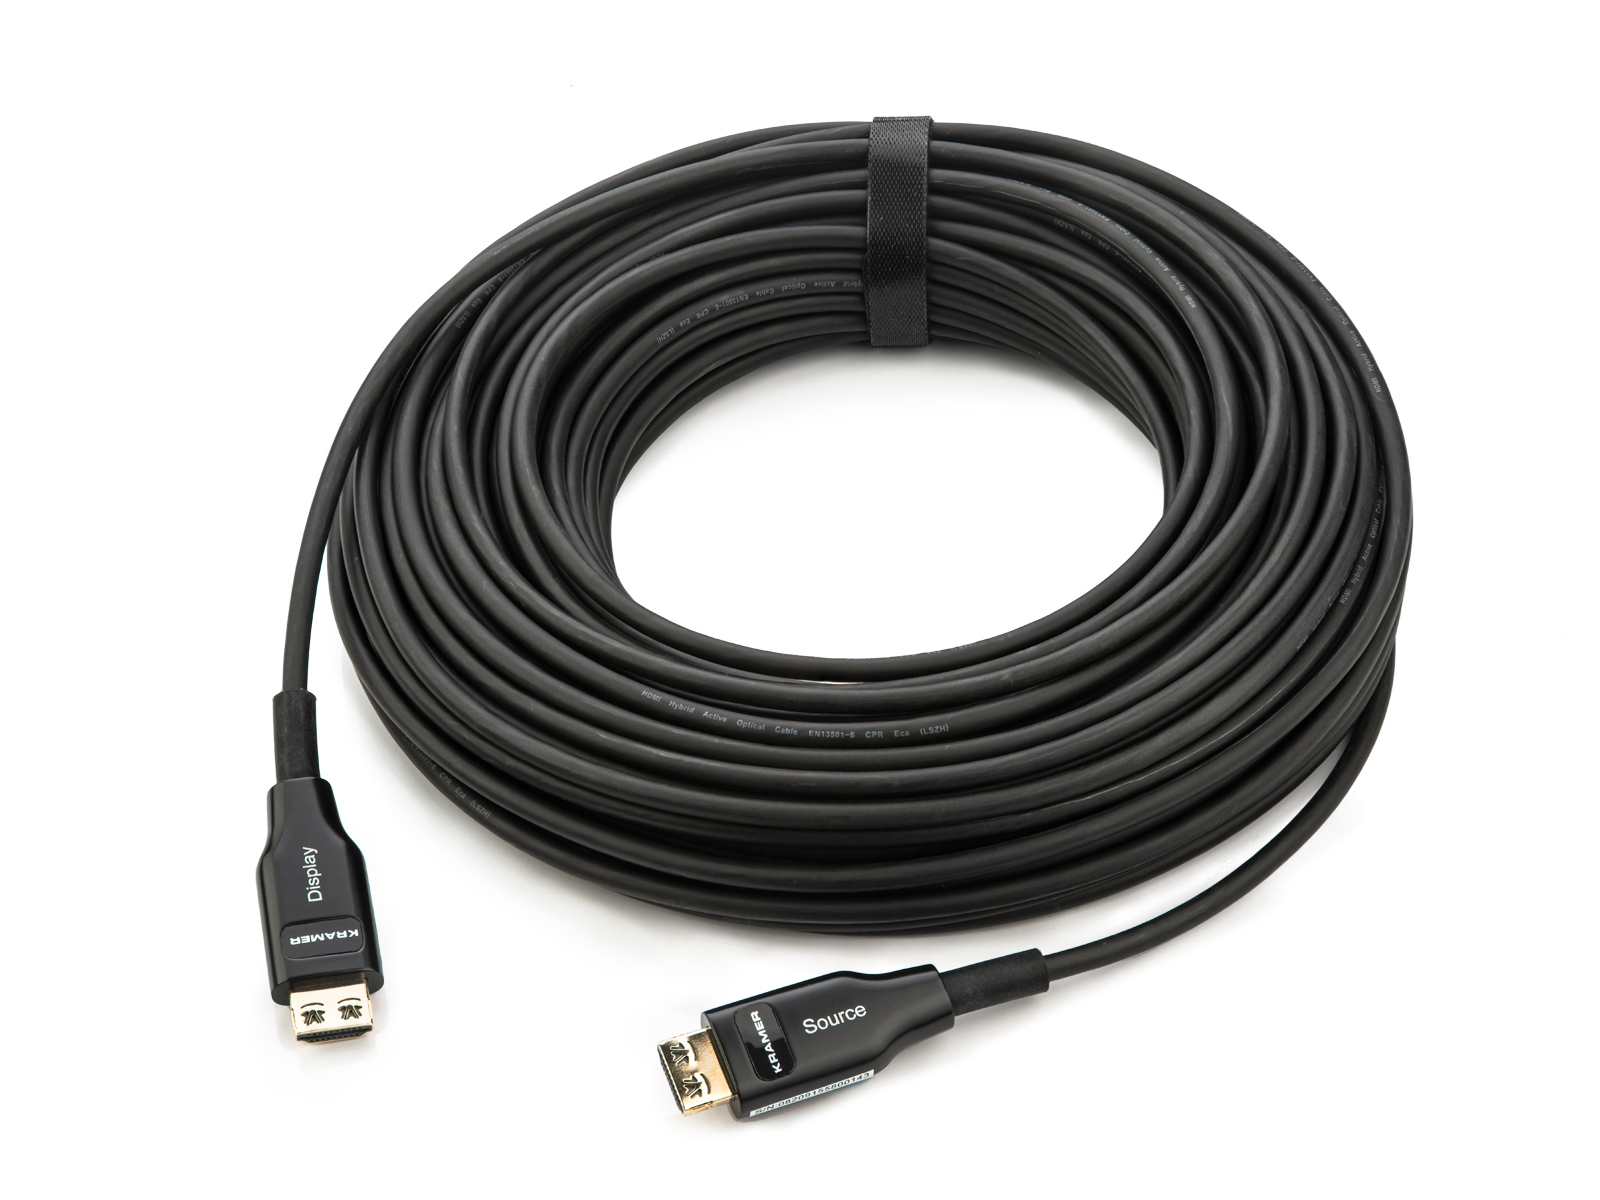 CP-AOCH/60F-262 80m/262ft High-Speed HDMI Optic Hybrid Cable - Plenum Rated by Kramer